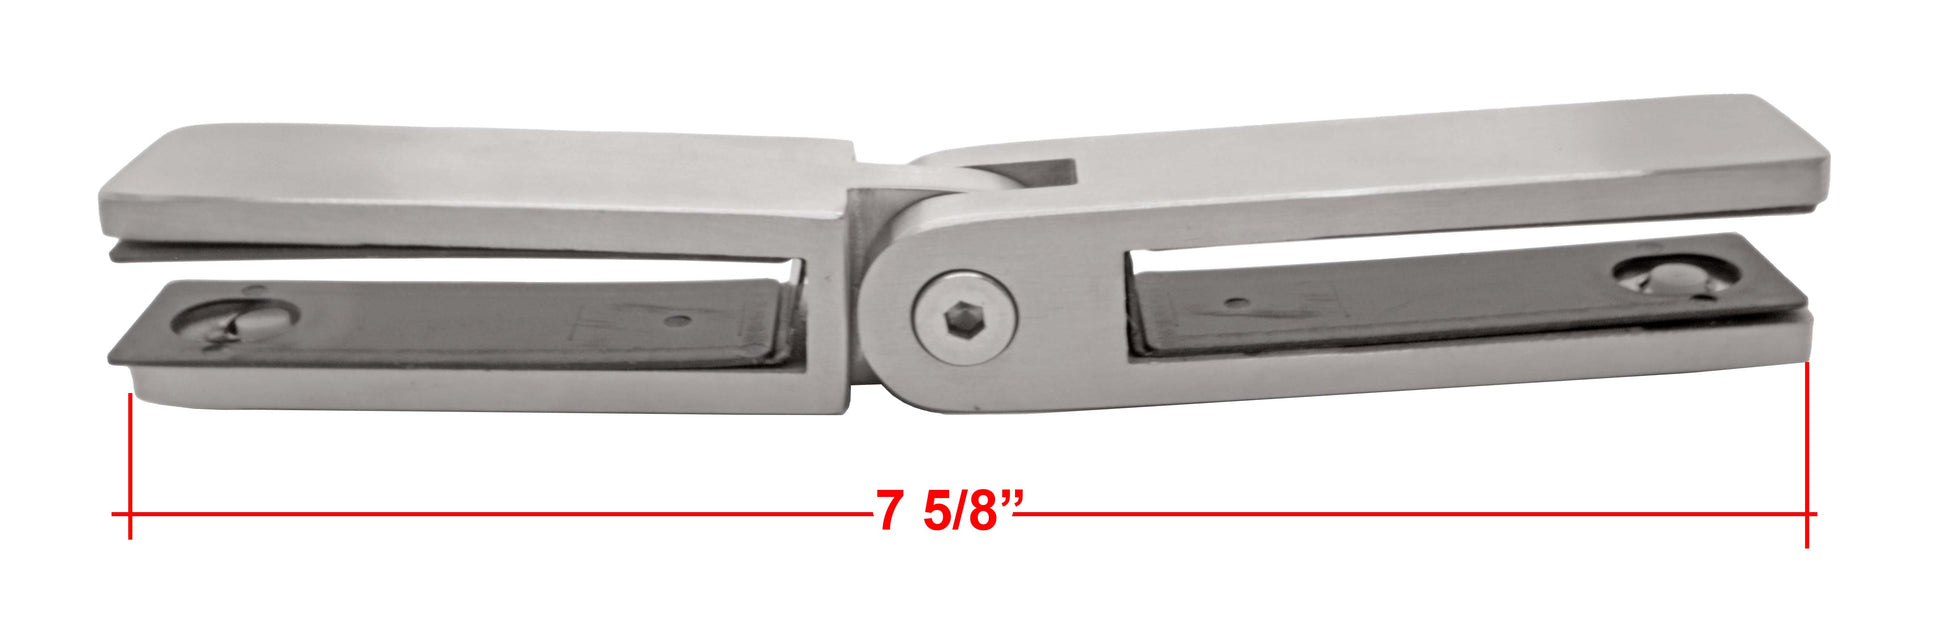 Stainless Steel 316 Adjustable 90 to 180 Degree 1/2" Glass to 1/2" Glass Clamp Railing  (G1200) - SHEMONICO